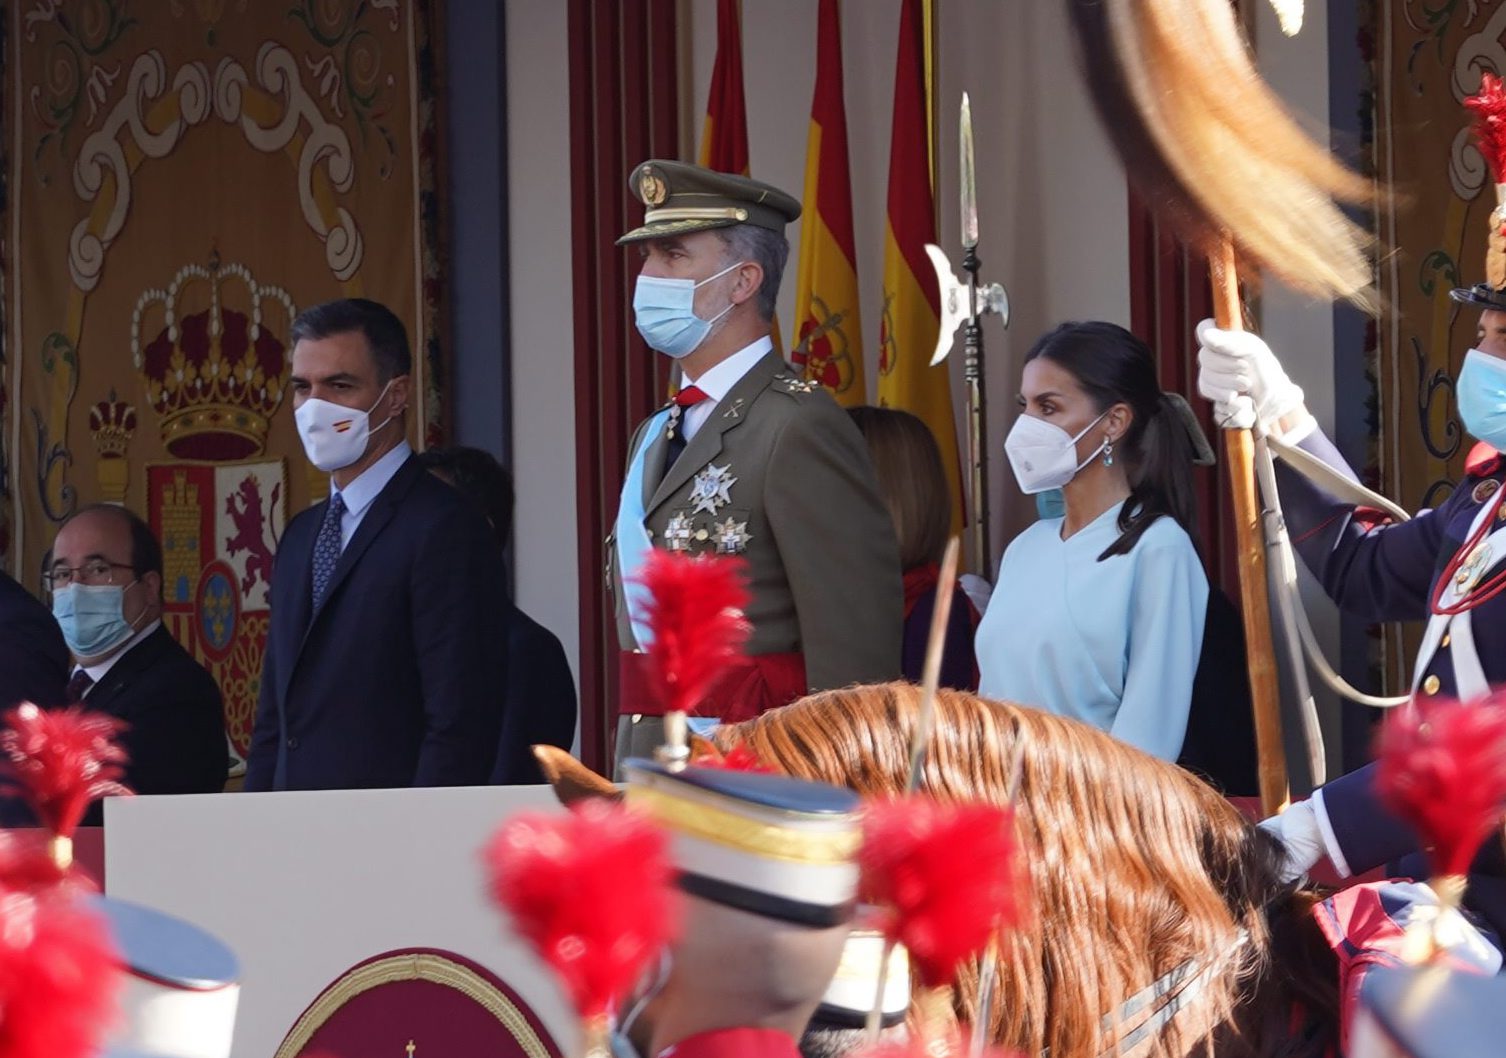 Pedro Sanchez jeered at Spain's National Day parade attended by King Felipe and Queen Letizia